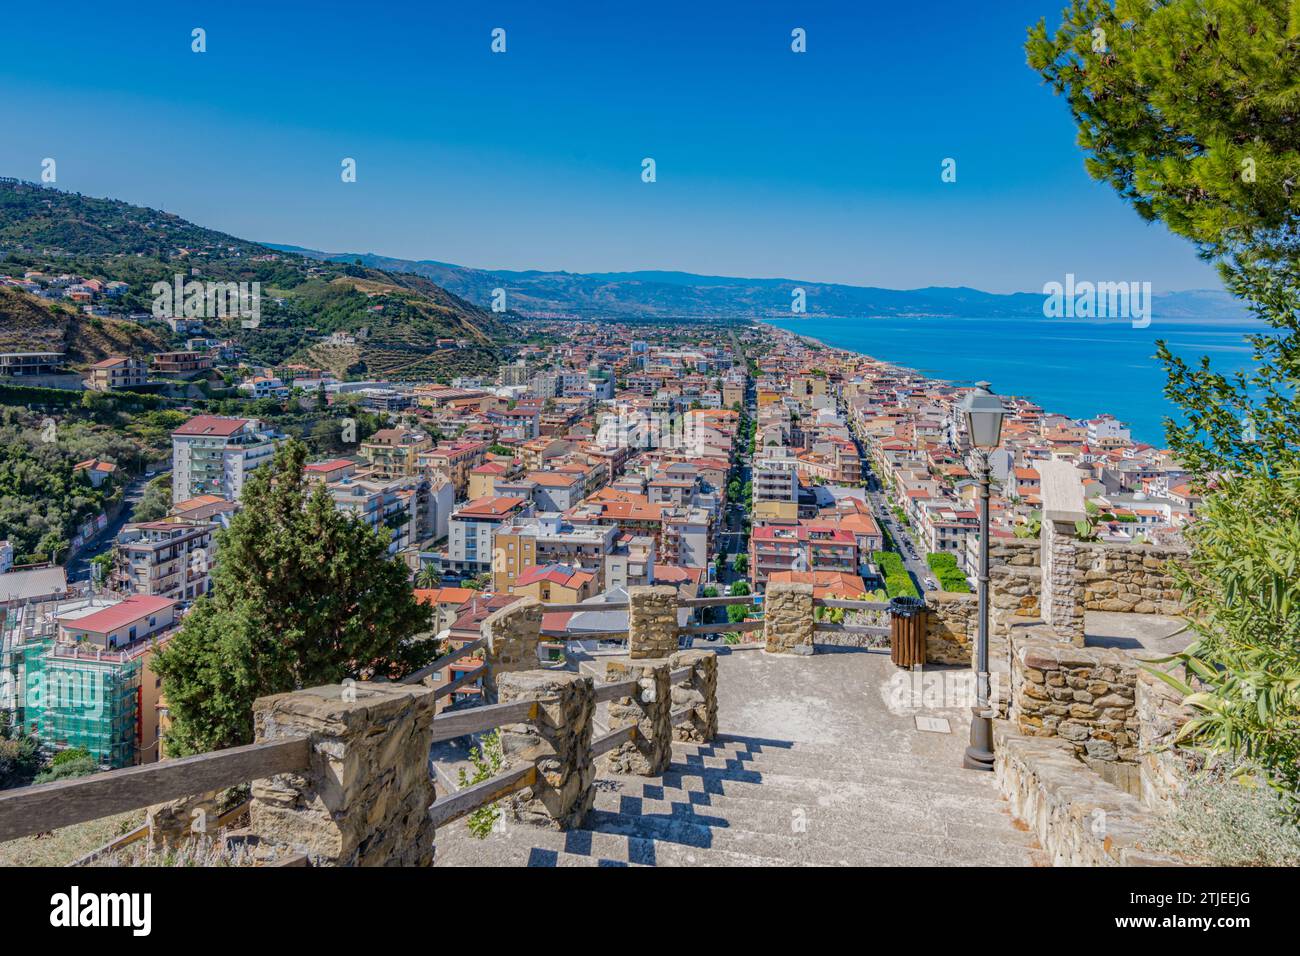 Panoramic view of Capo d'Orlando from the castle ruins, Sicily Stock Photo